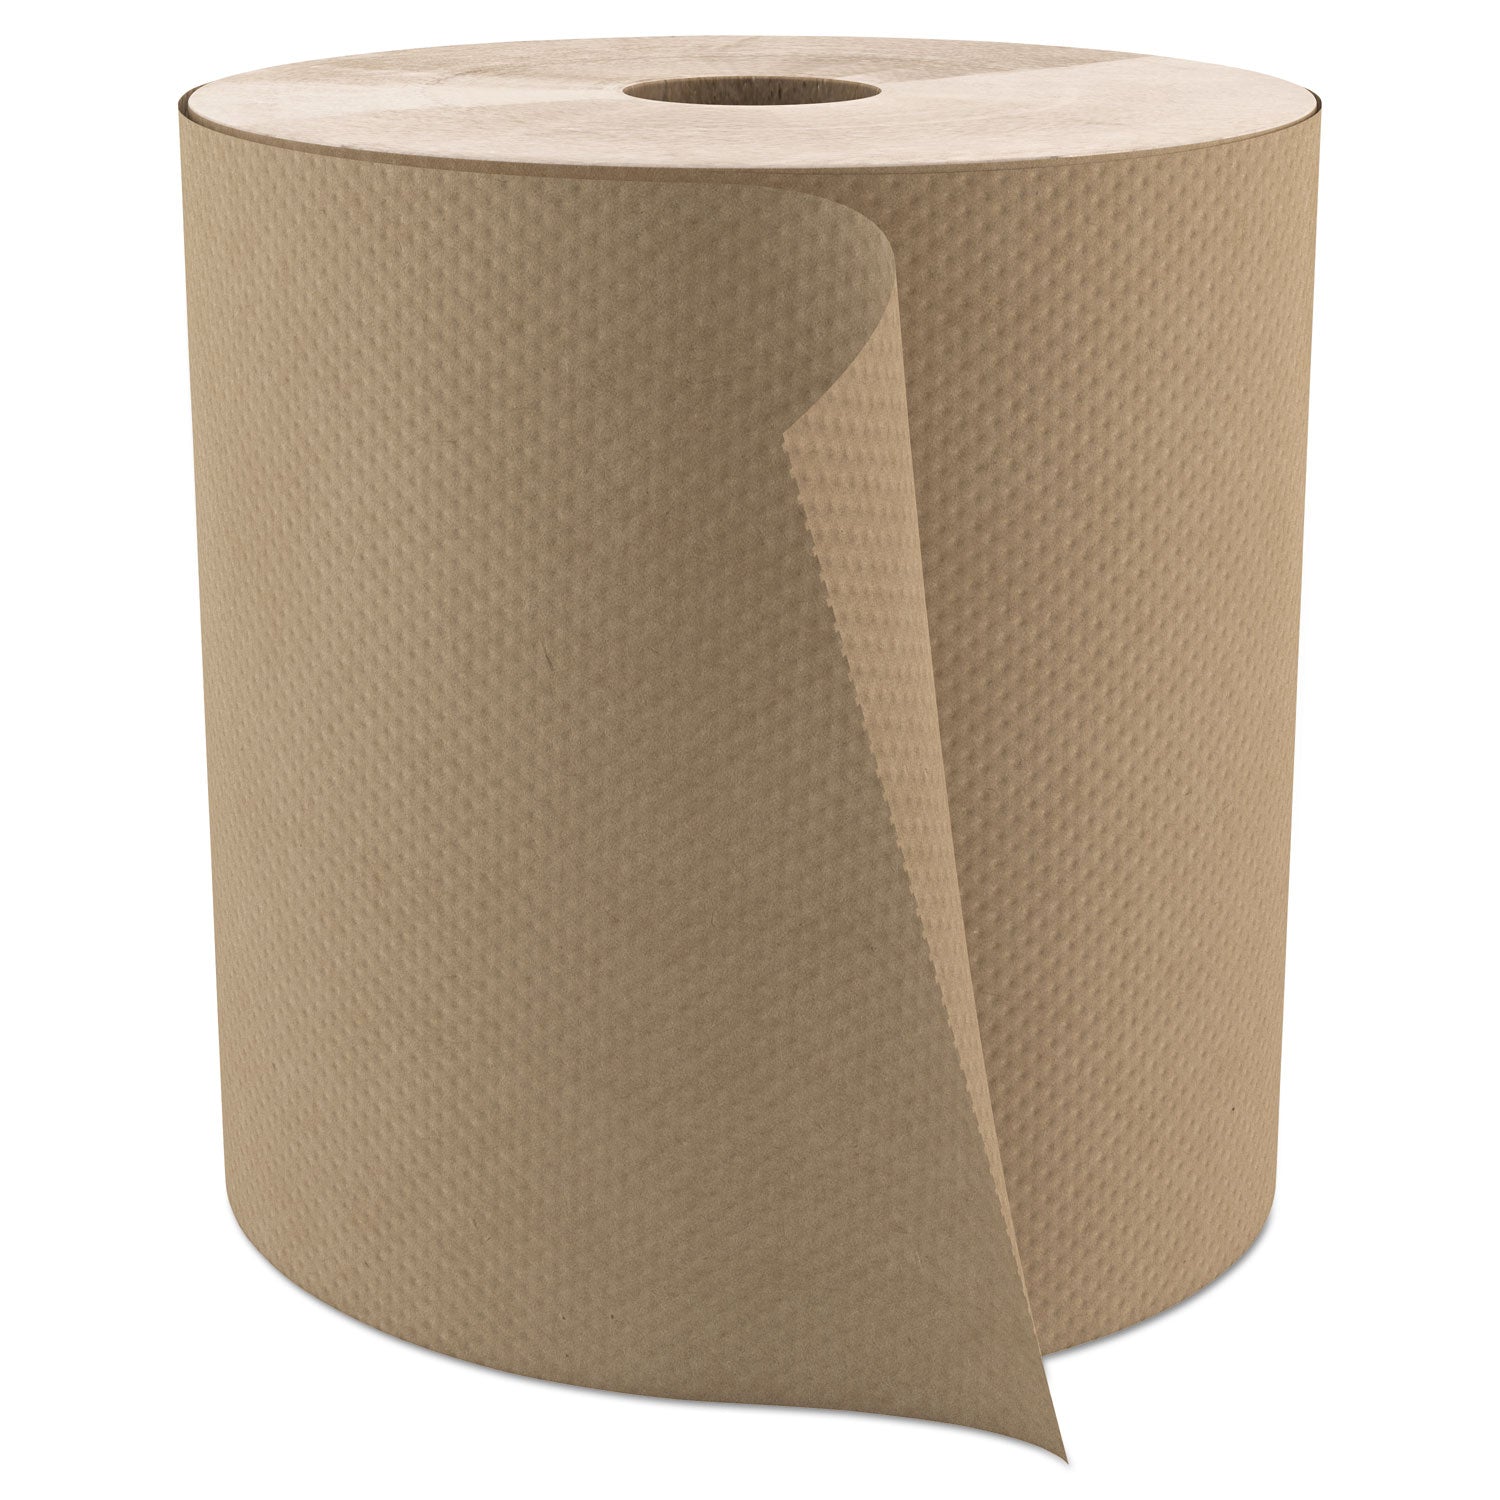 select-roll-paper-towels-1-ply-79-x-800-ft-natural-6-carton_csdh085 - 1